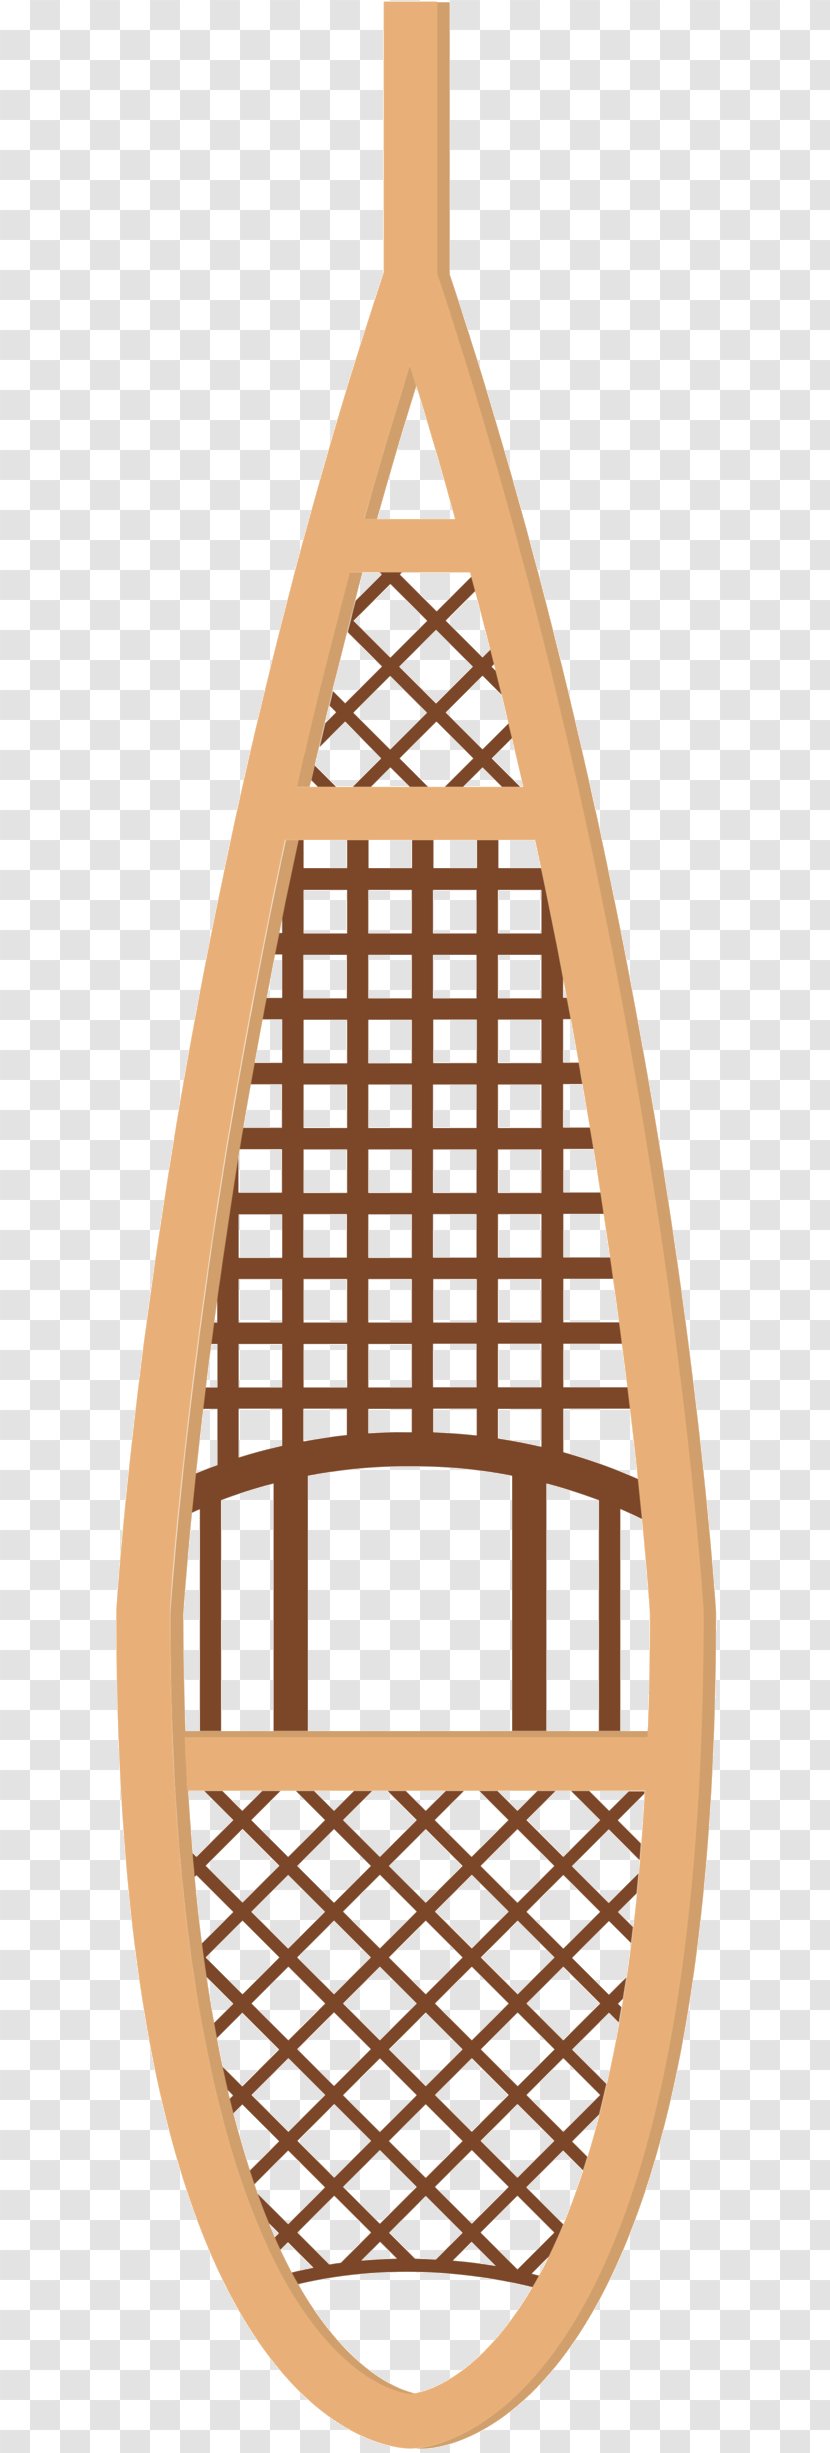 Clip Art Product Design Line - Outdoor Furniture - Chair Transparent PNG